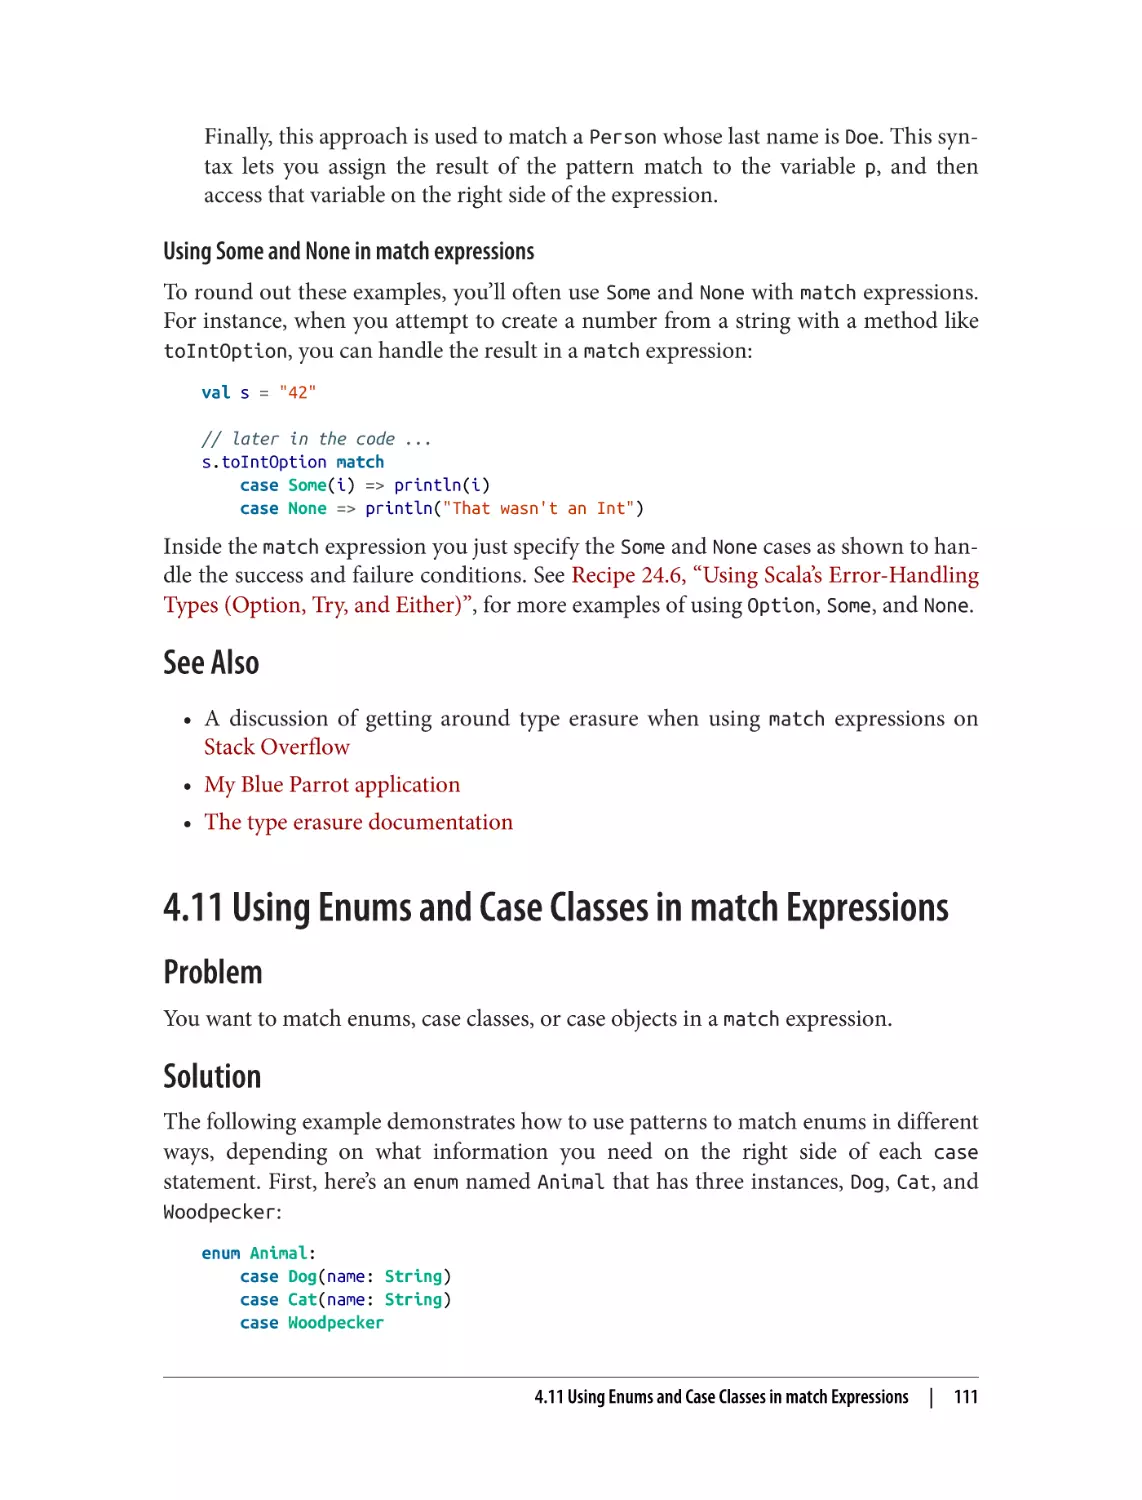 See Also
4.11 Using Enums and Case Classes in match Expressions
Problem
Solution